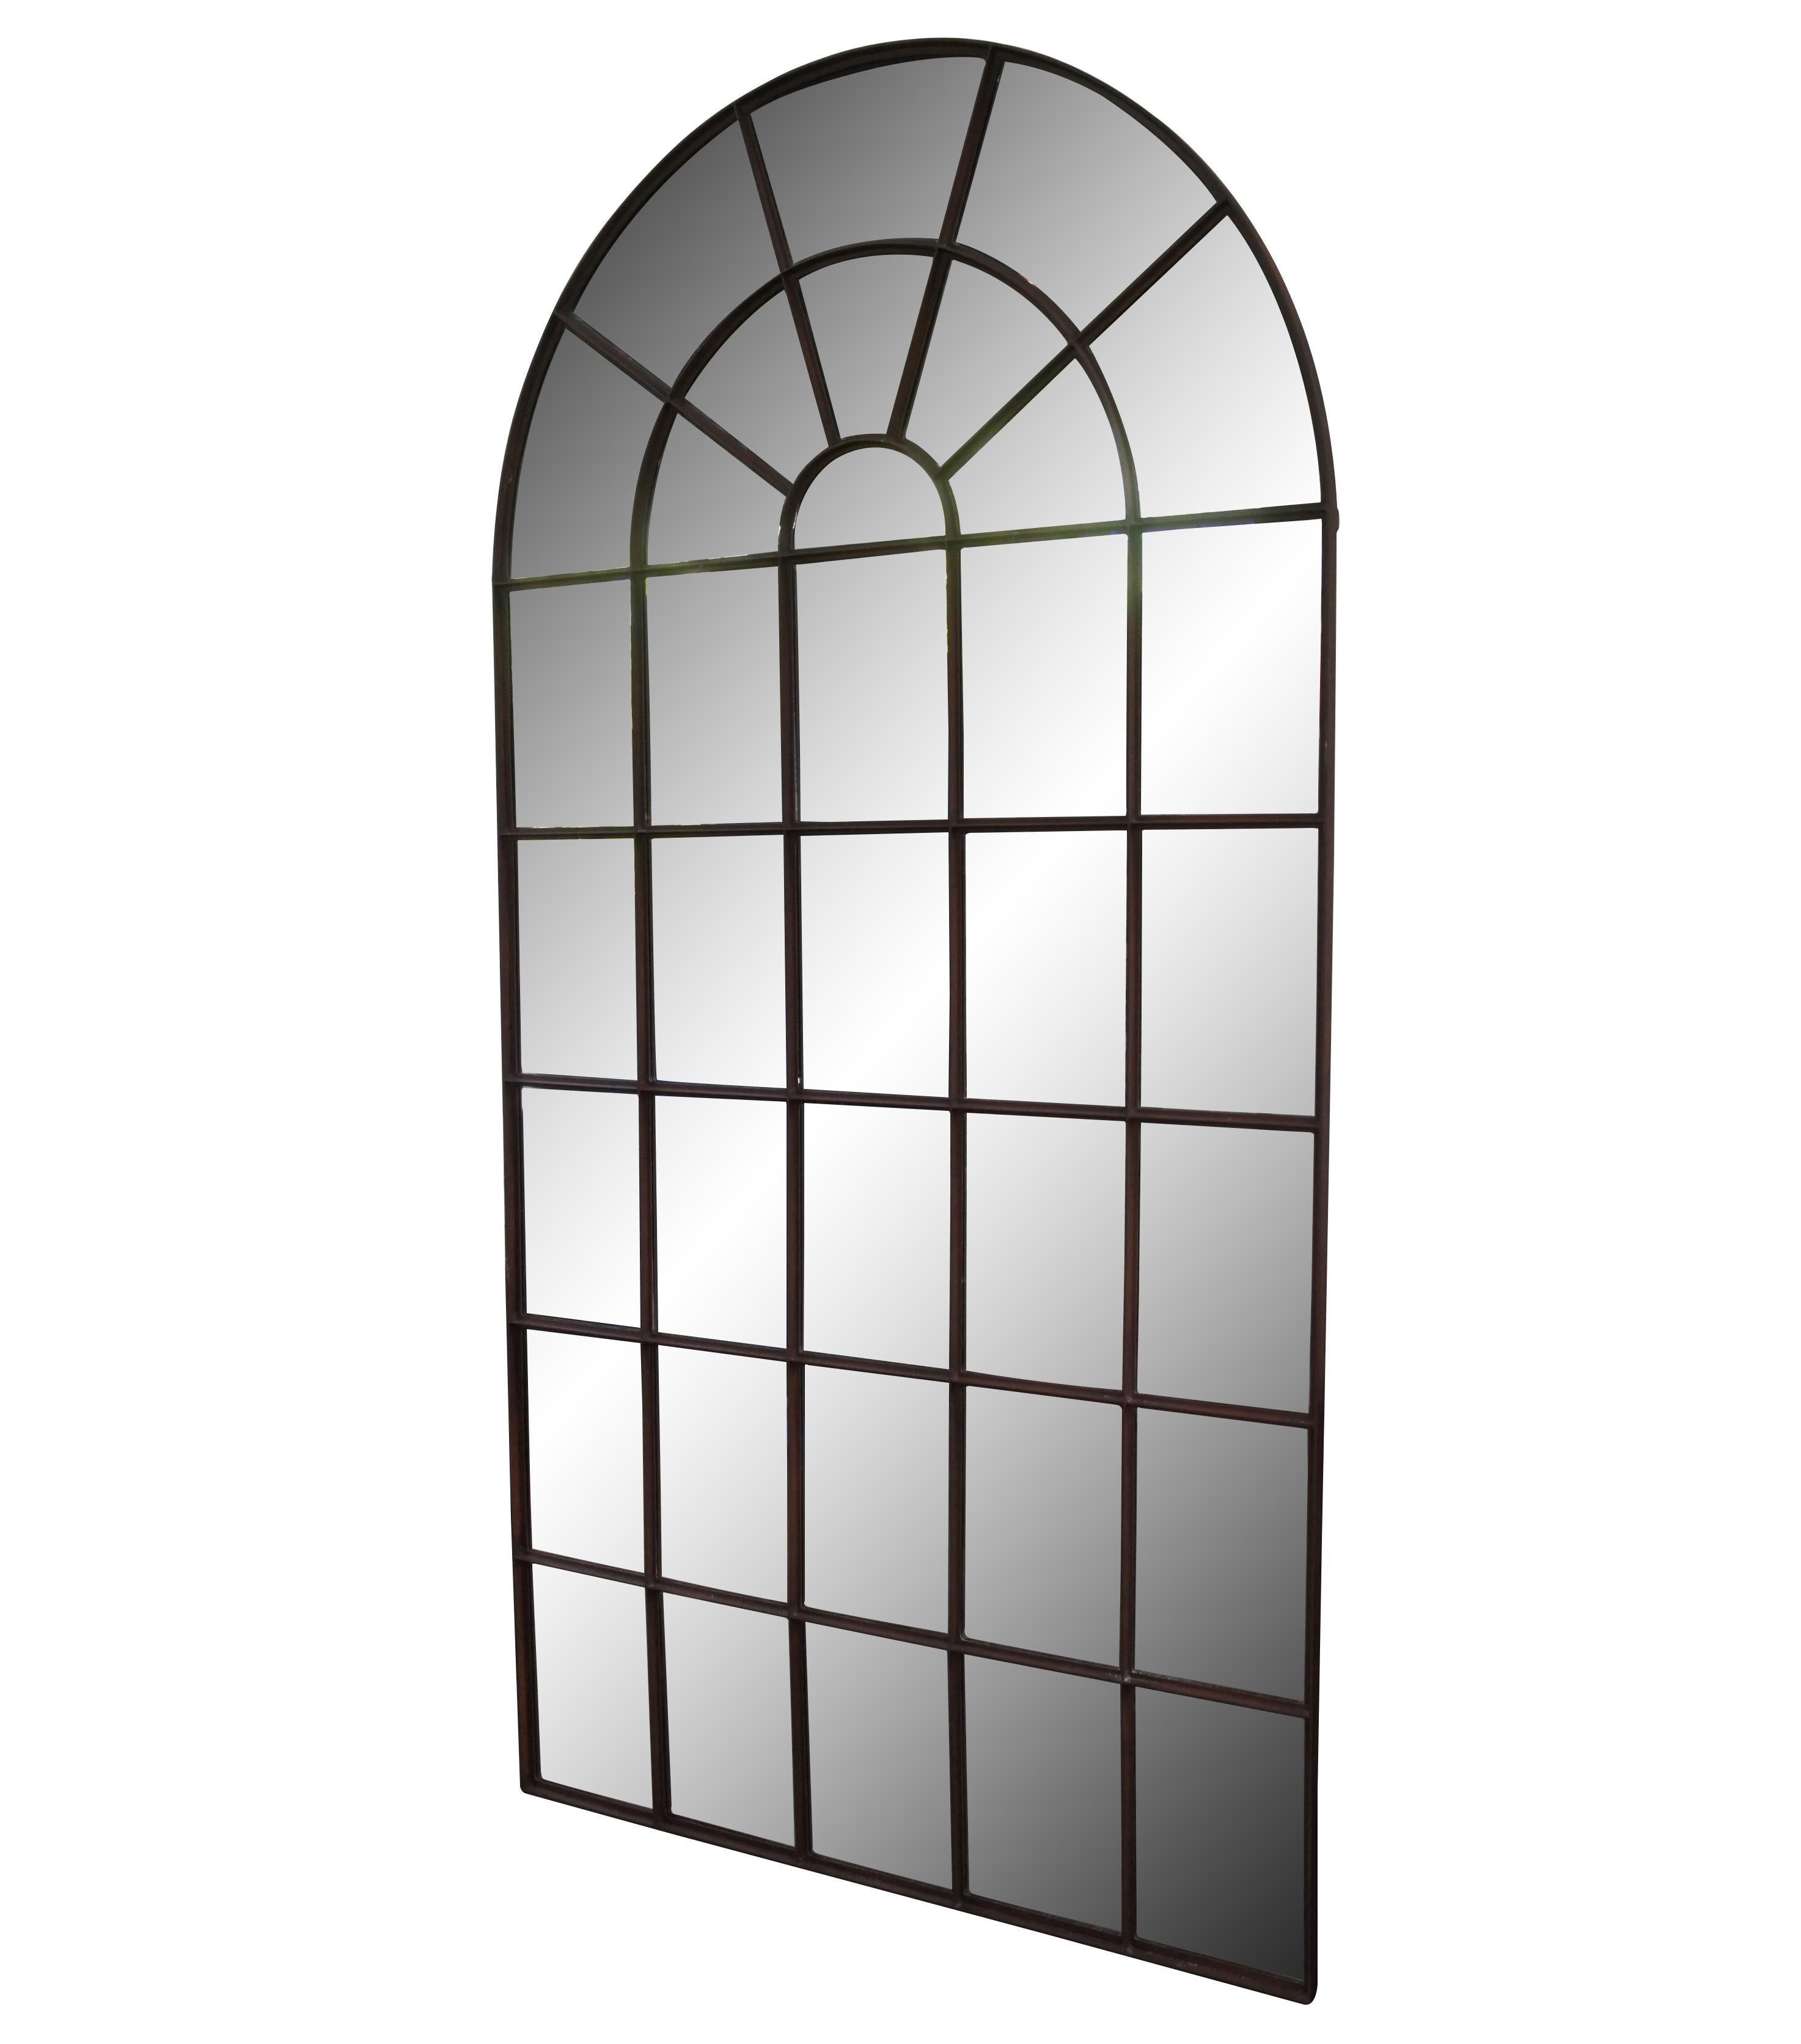 Inspired by 17th-century Palladian architecture, the Palladian Leaner reflects the symmetry, elegant proportions and classical lines that define the style. 

Dozens of panes individually framed in iron. Measure: 108